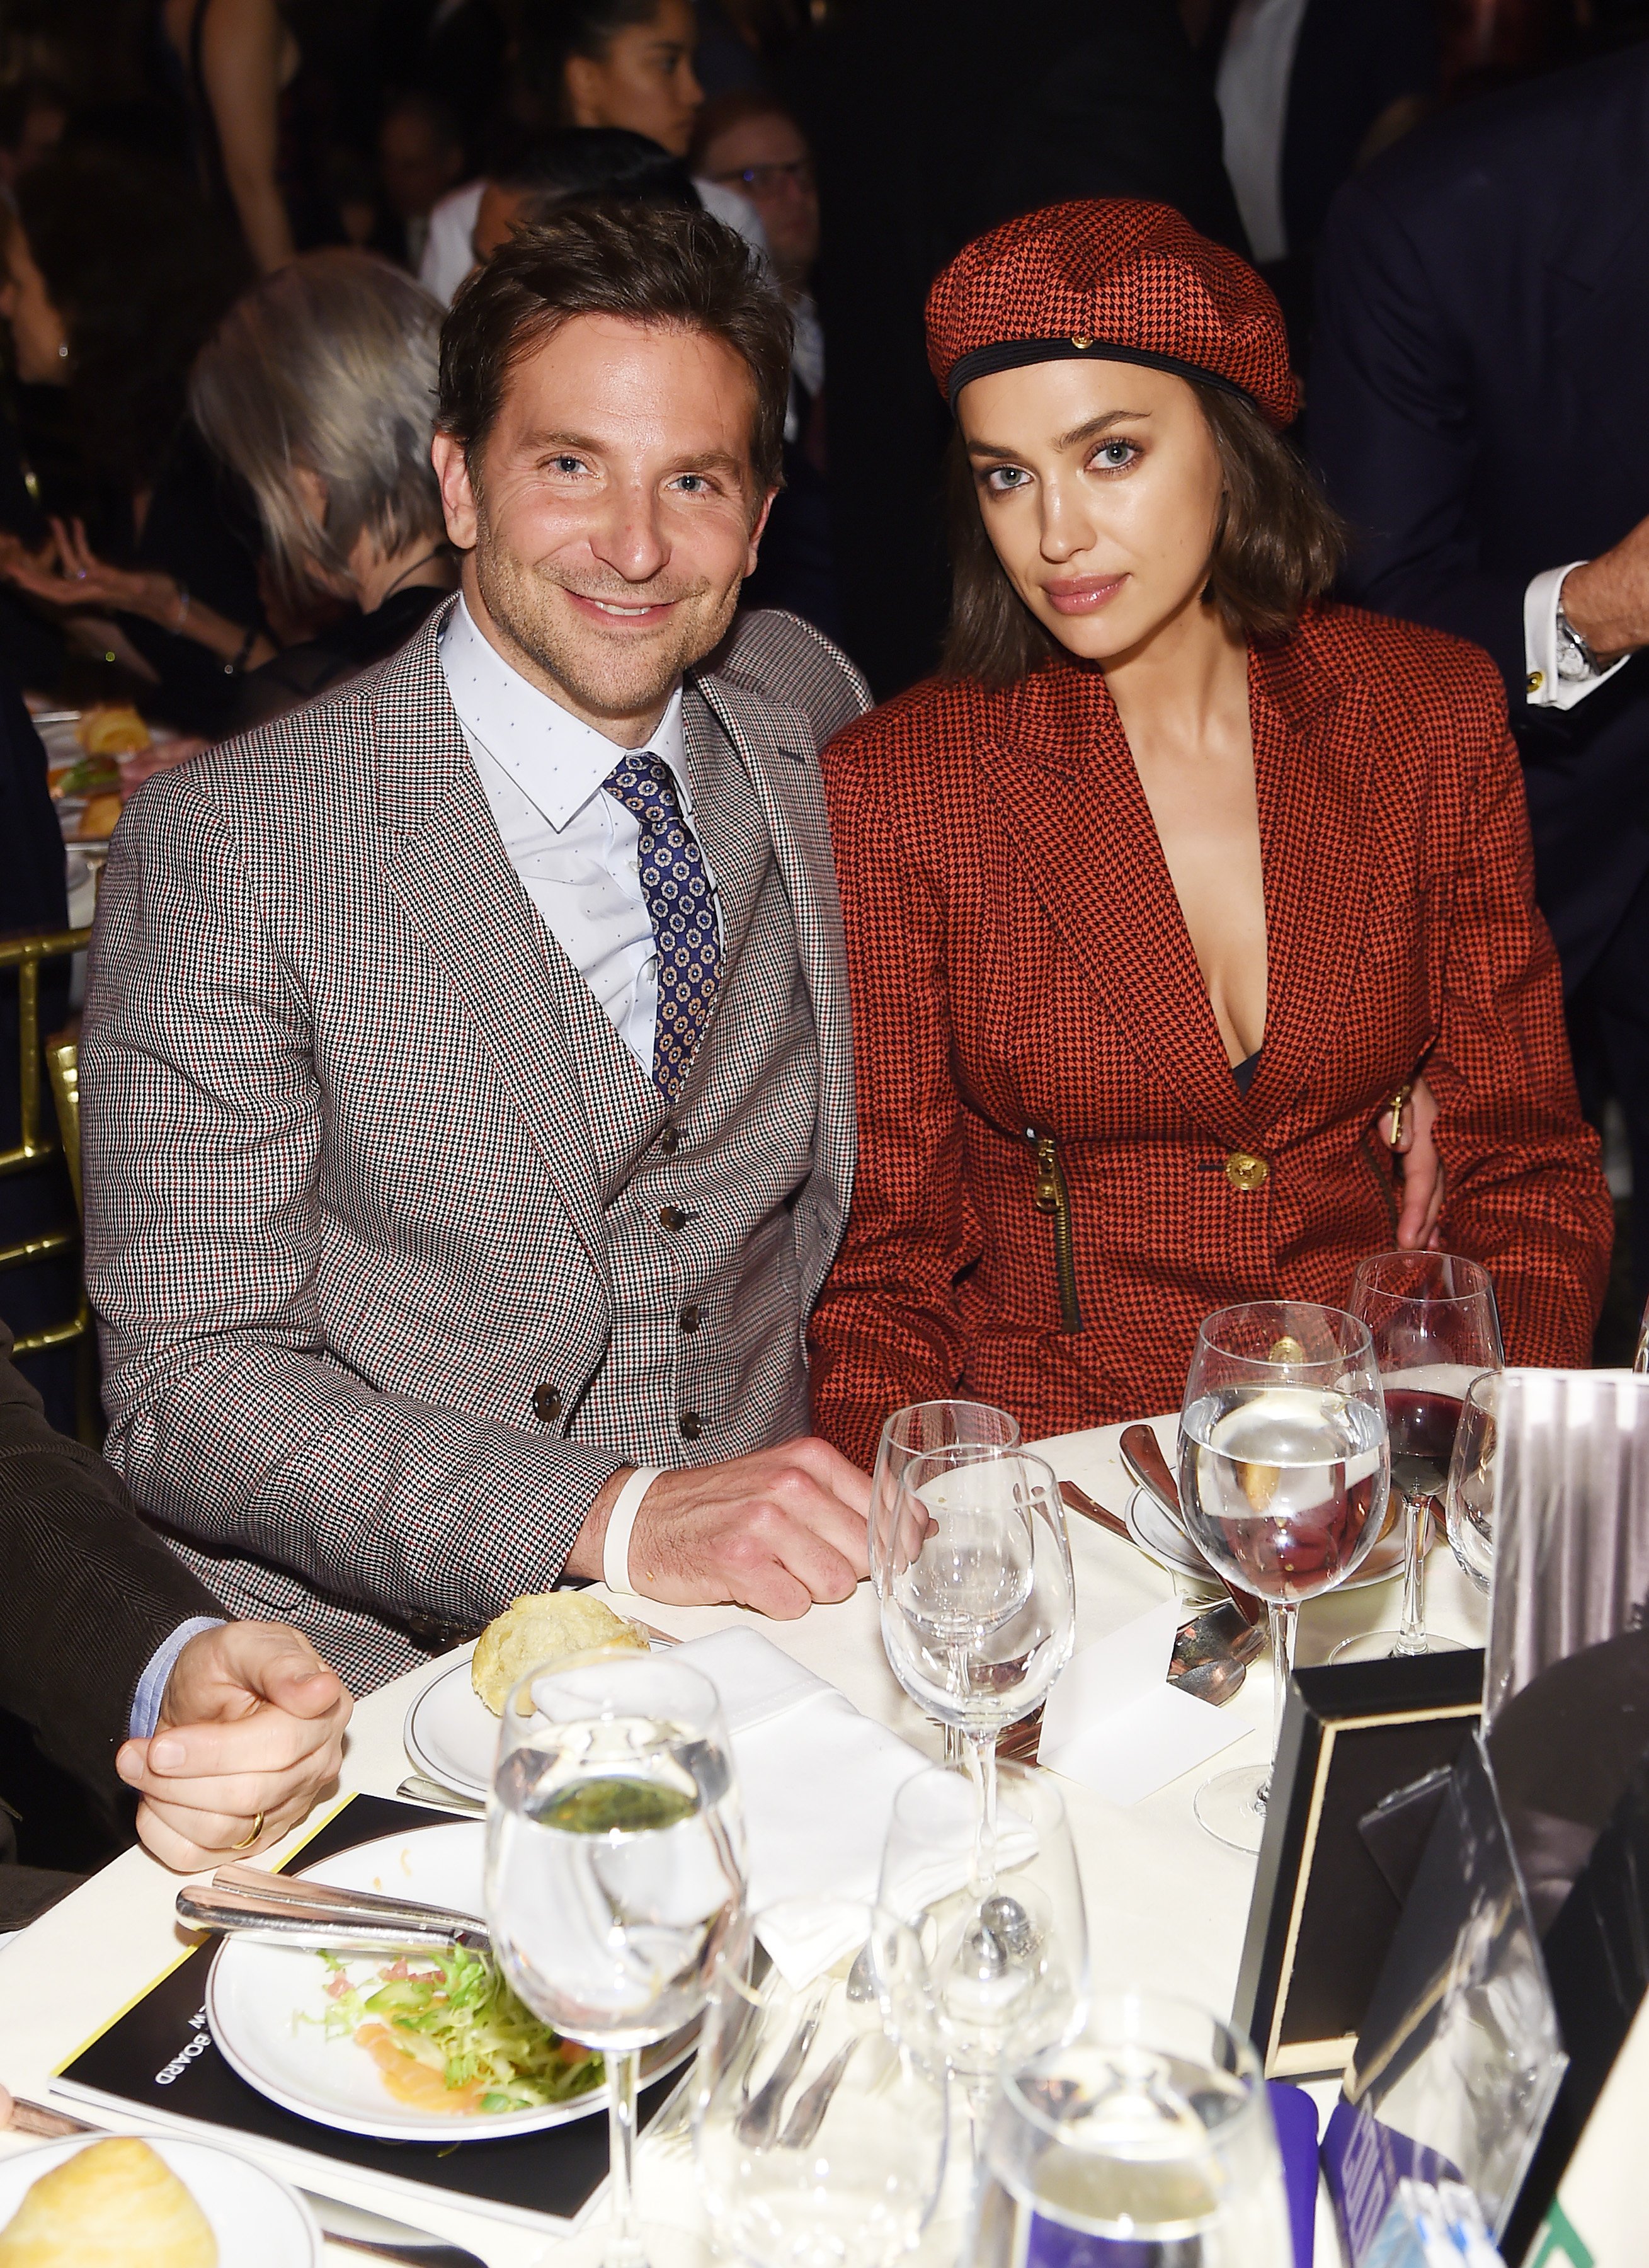 Bradley Cooper and Irina Shayk attend The National Board of Review Annual Awards on January 8, 2019 in New York City | Source: Getty Images